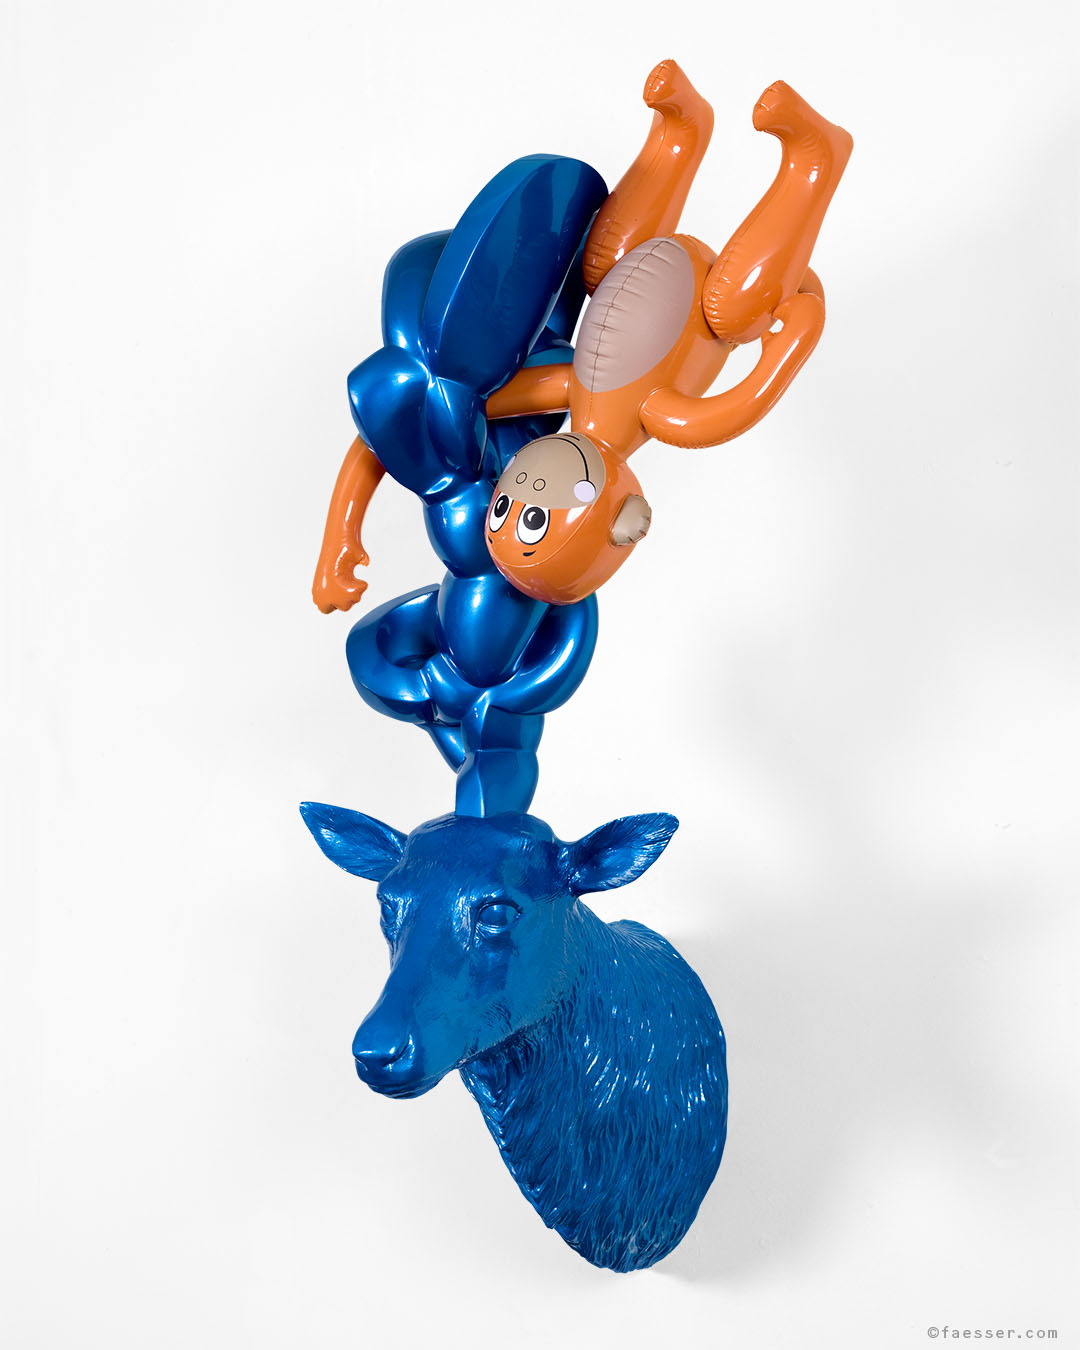 Ceci n'est pas un Koons, high glossy varnished deer trophy with the branded Koons monkey; work of art as figurative sculpture; artist Roland Faesser, sculptor and painter 2007